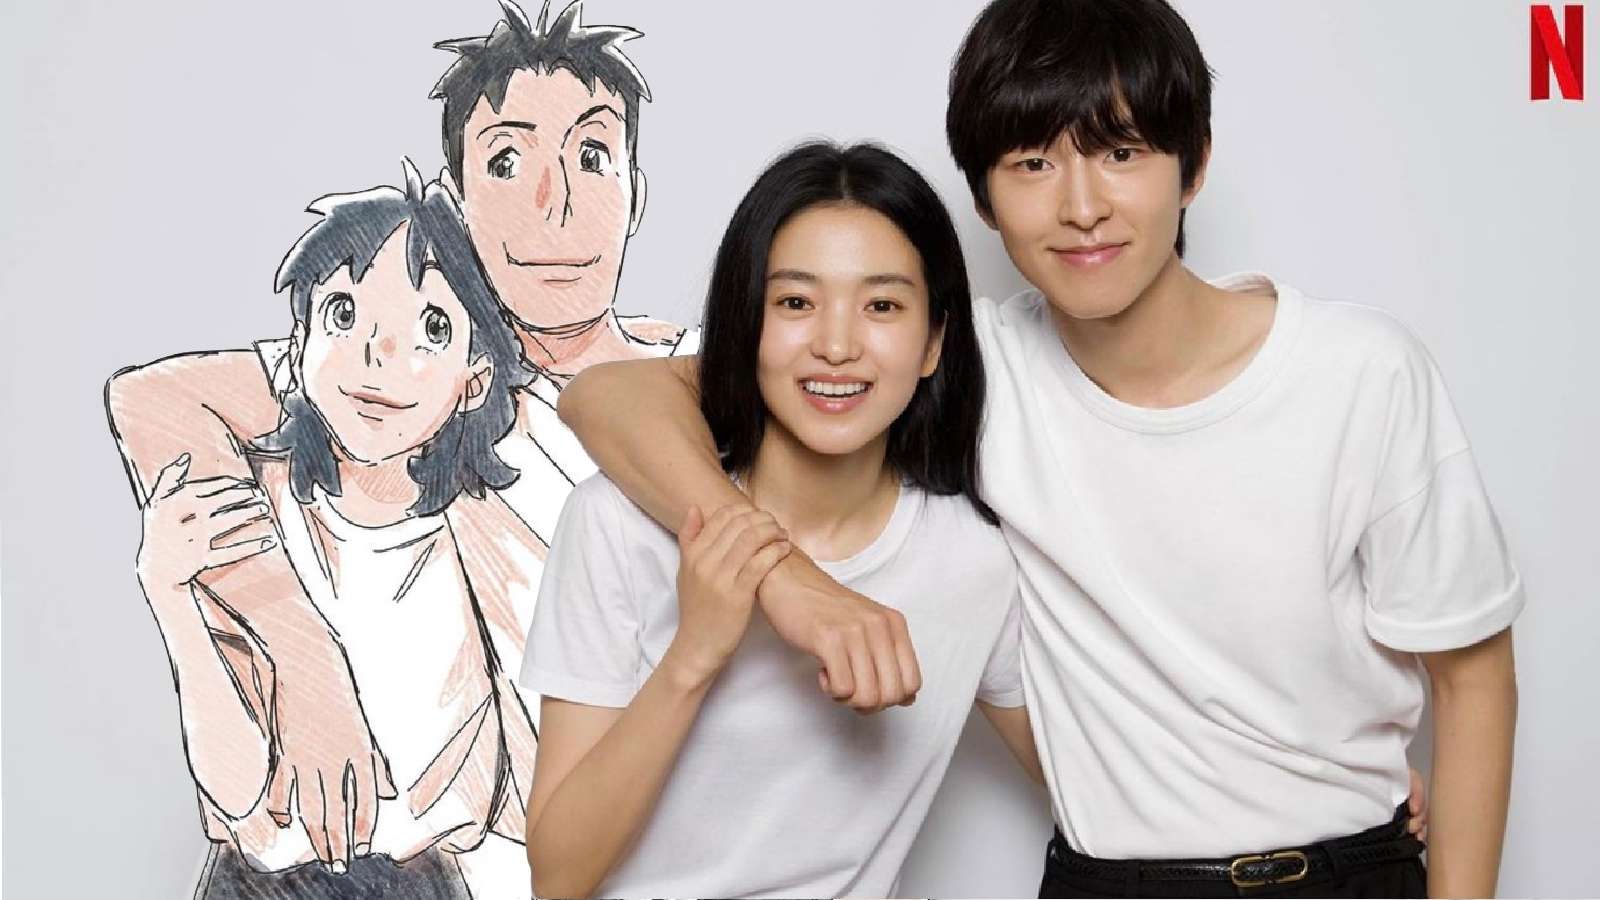 Kim Tae-ri and Hong Kyung star in Netflix's animated romance movie Lost in Starlight